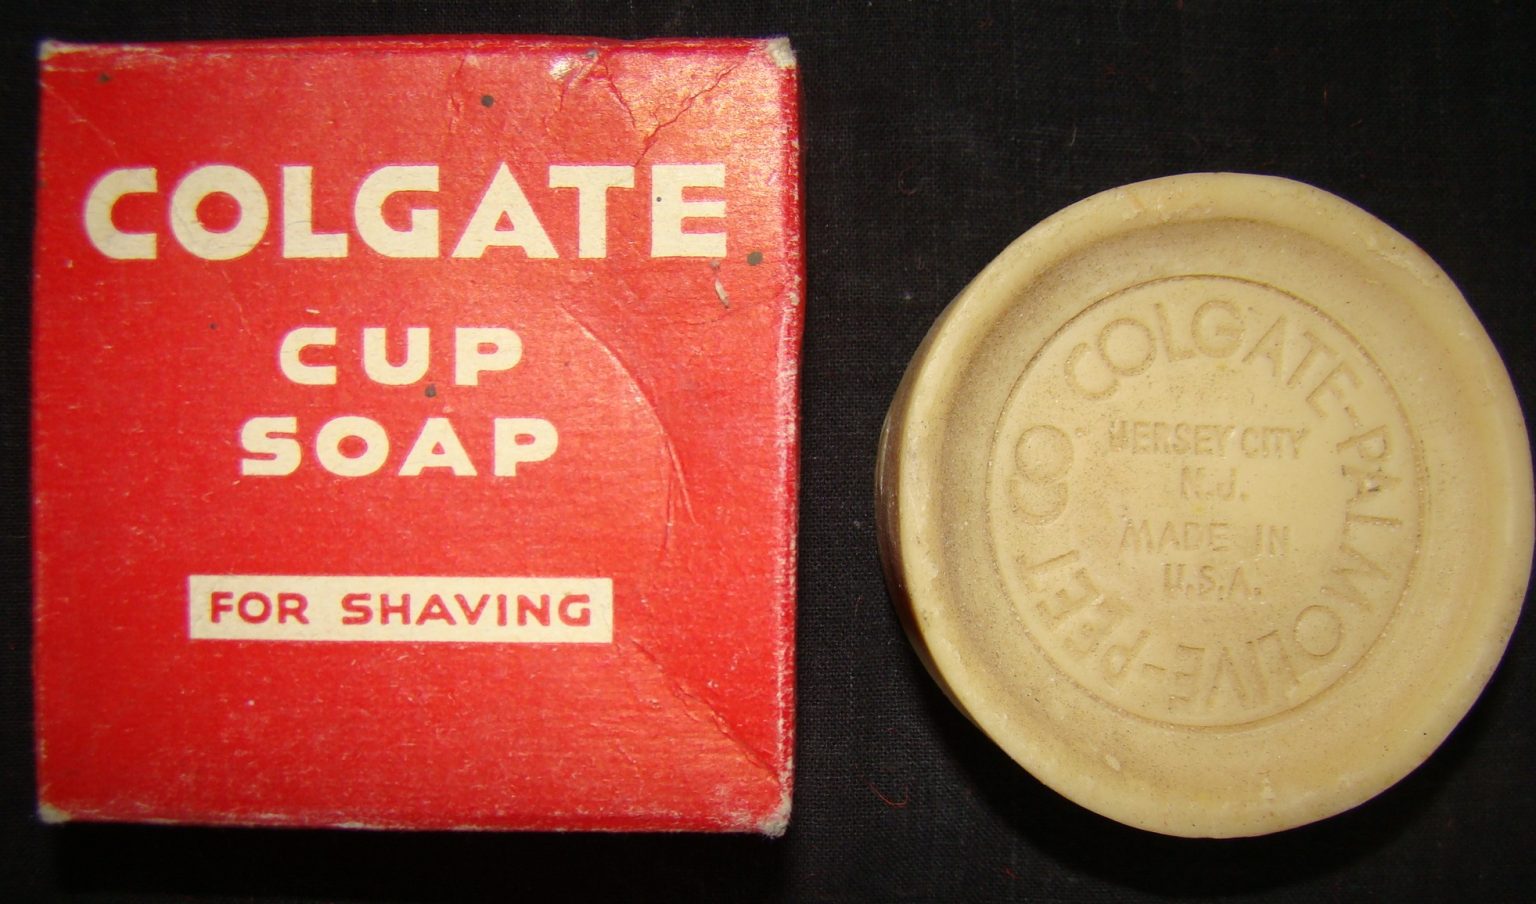 Colgate-Soap-First-Products-Of-Famous-Brands-And-Companies-1536x904.jpg